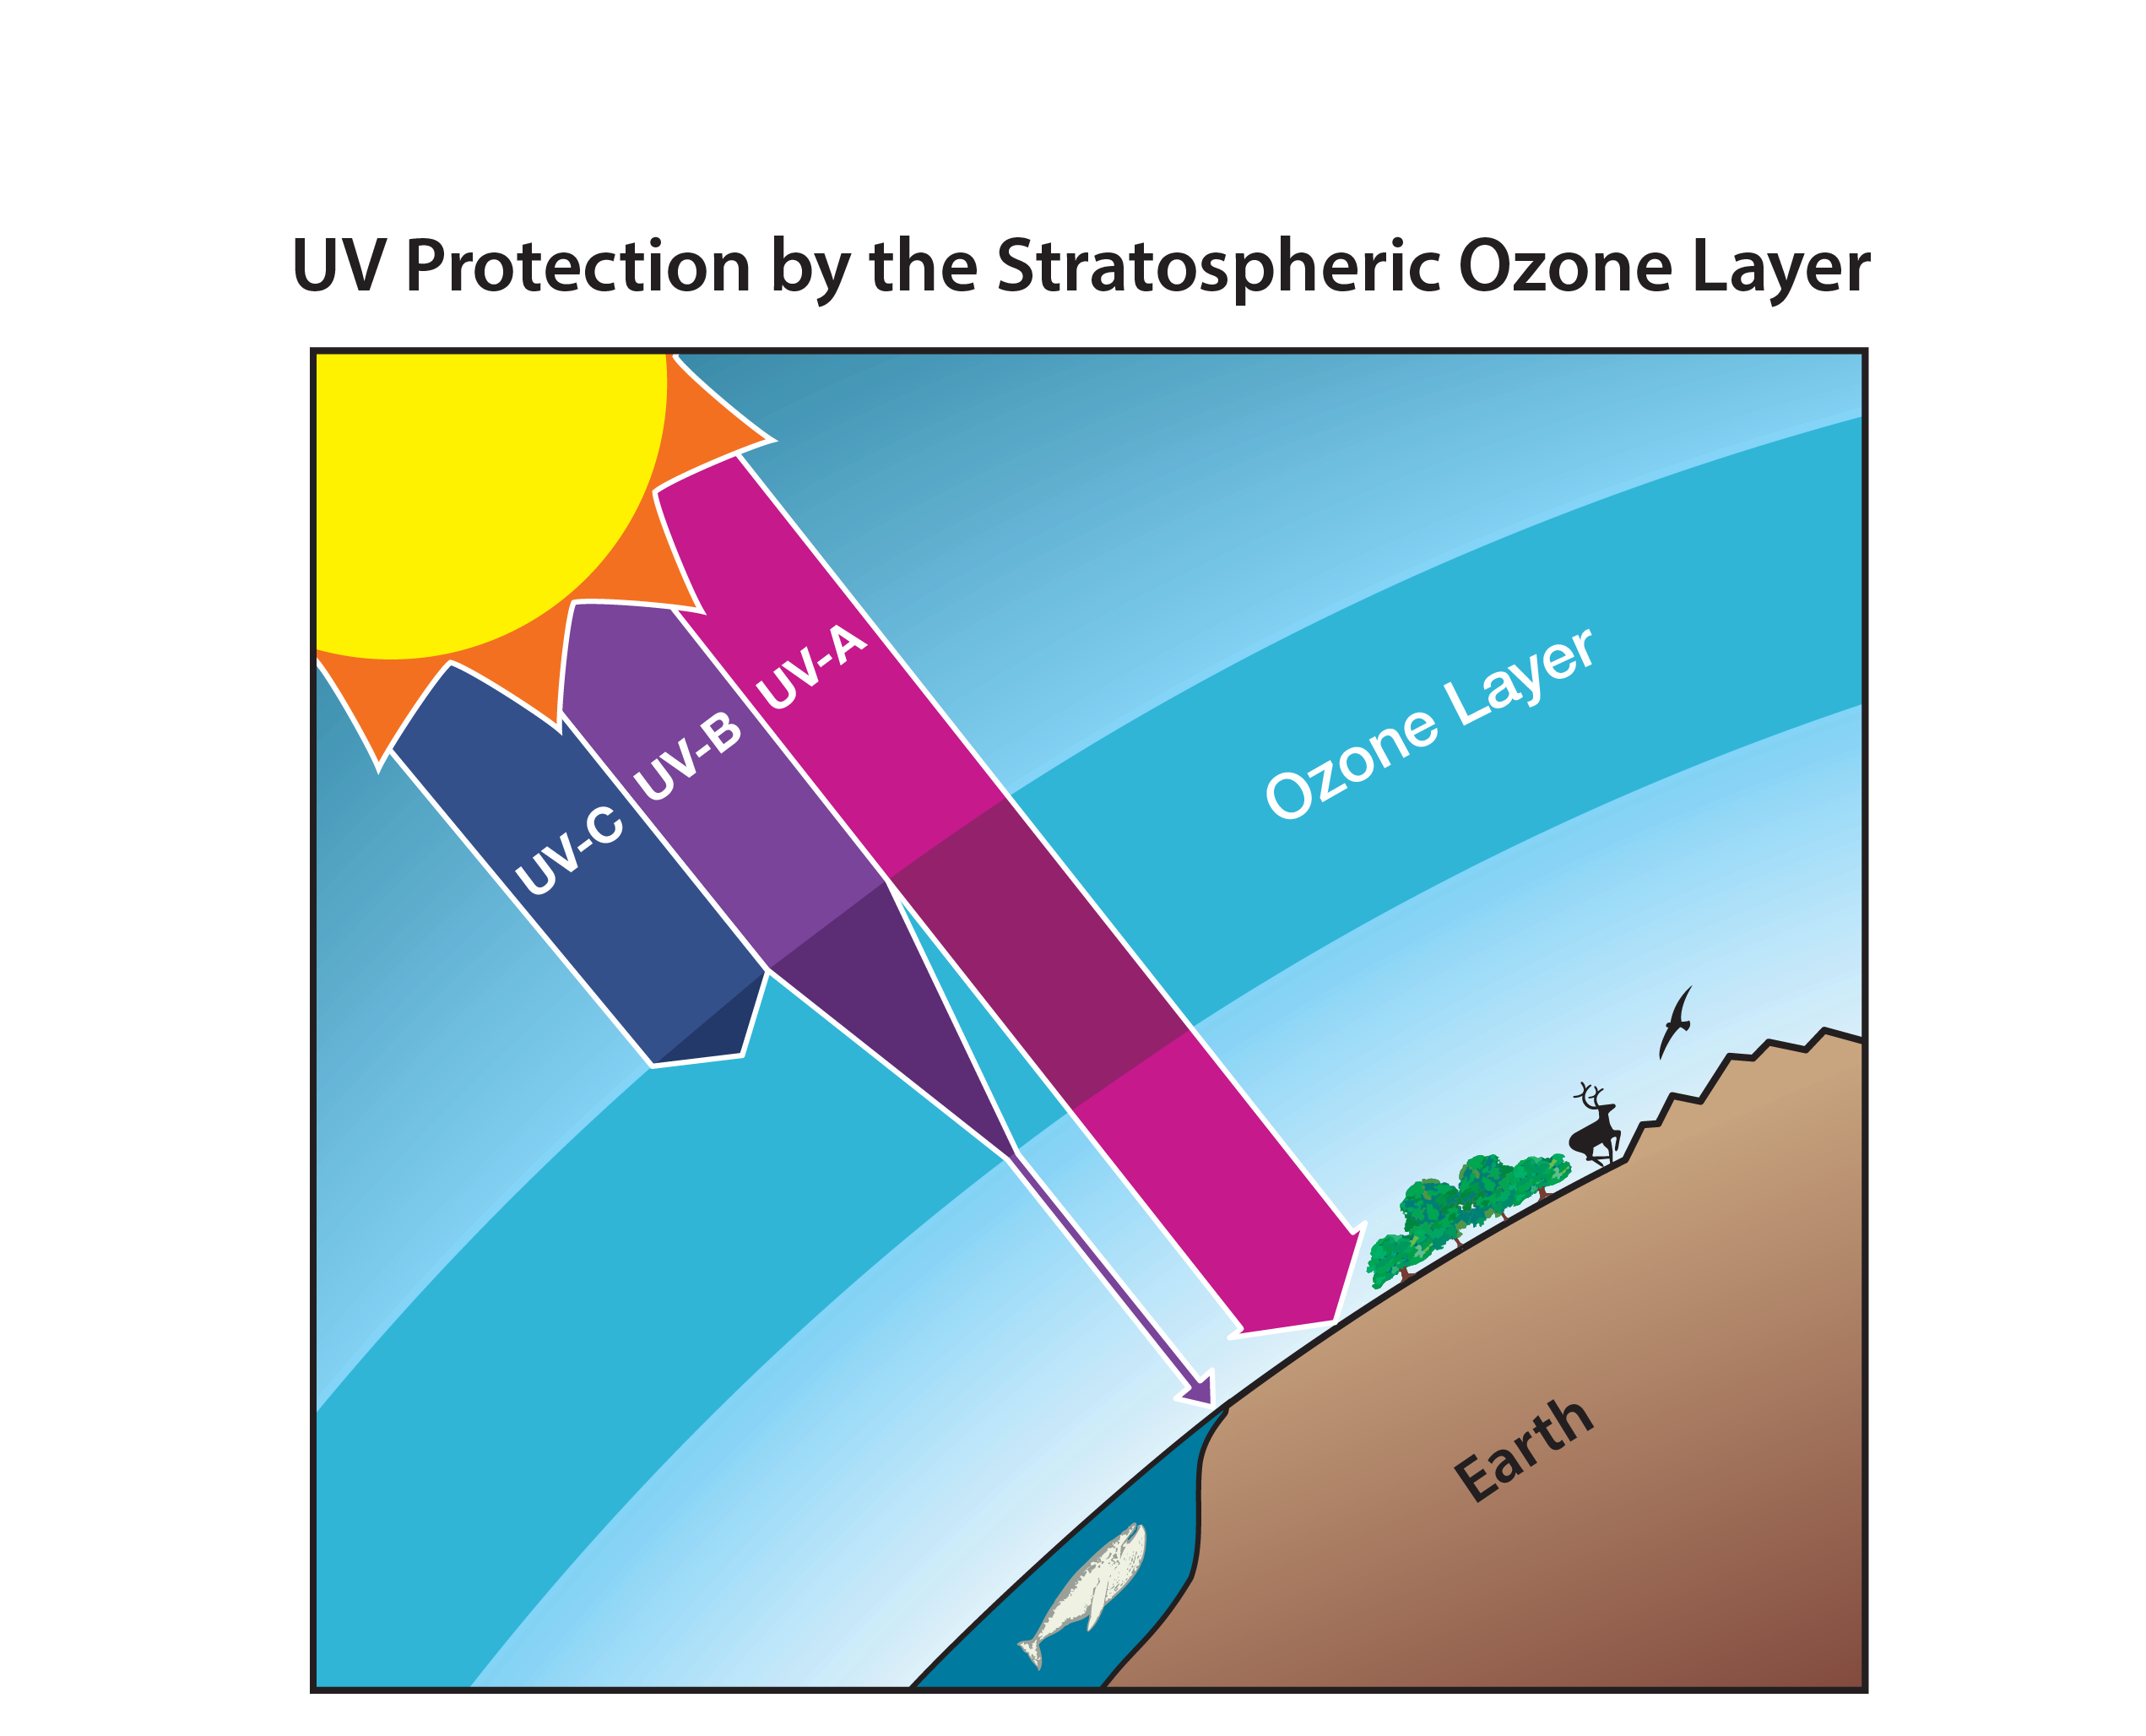 UV Protection by the Stratospheric Ozone Layer